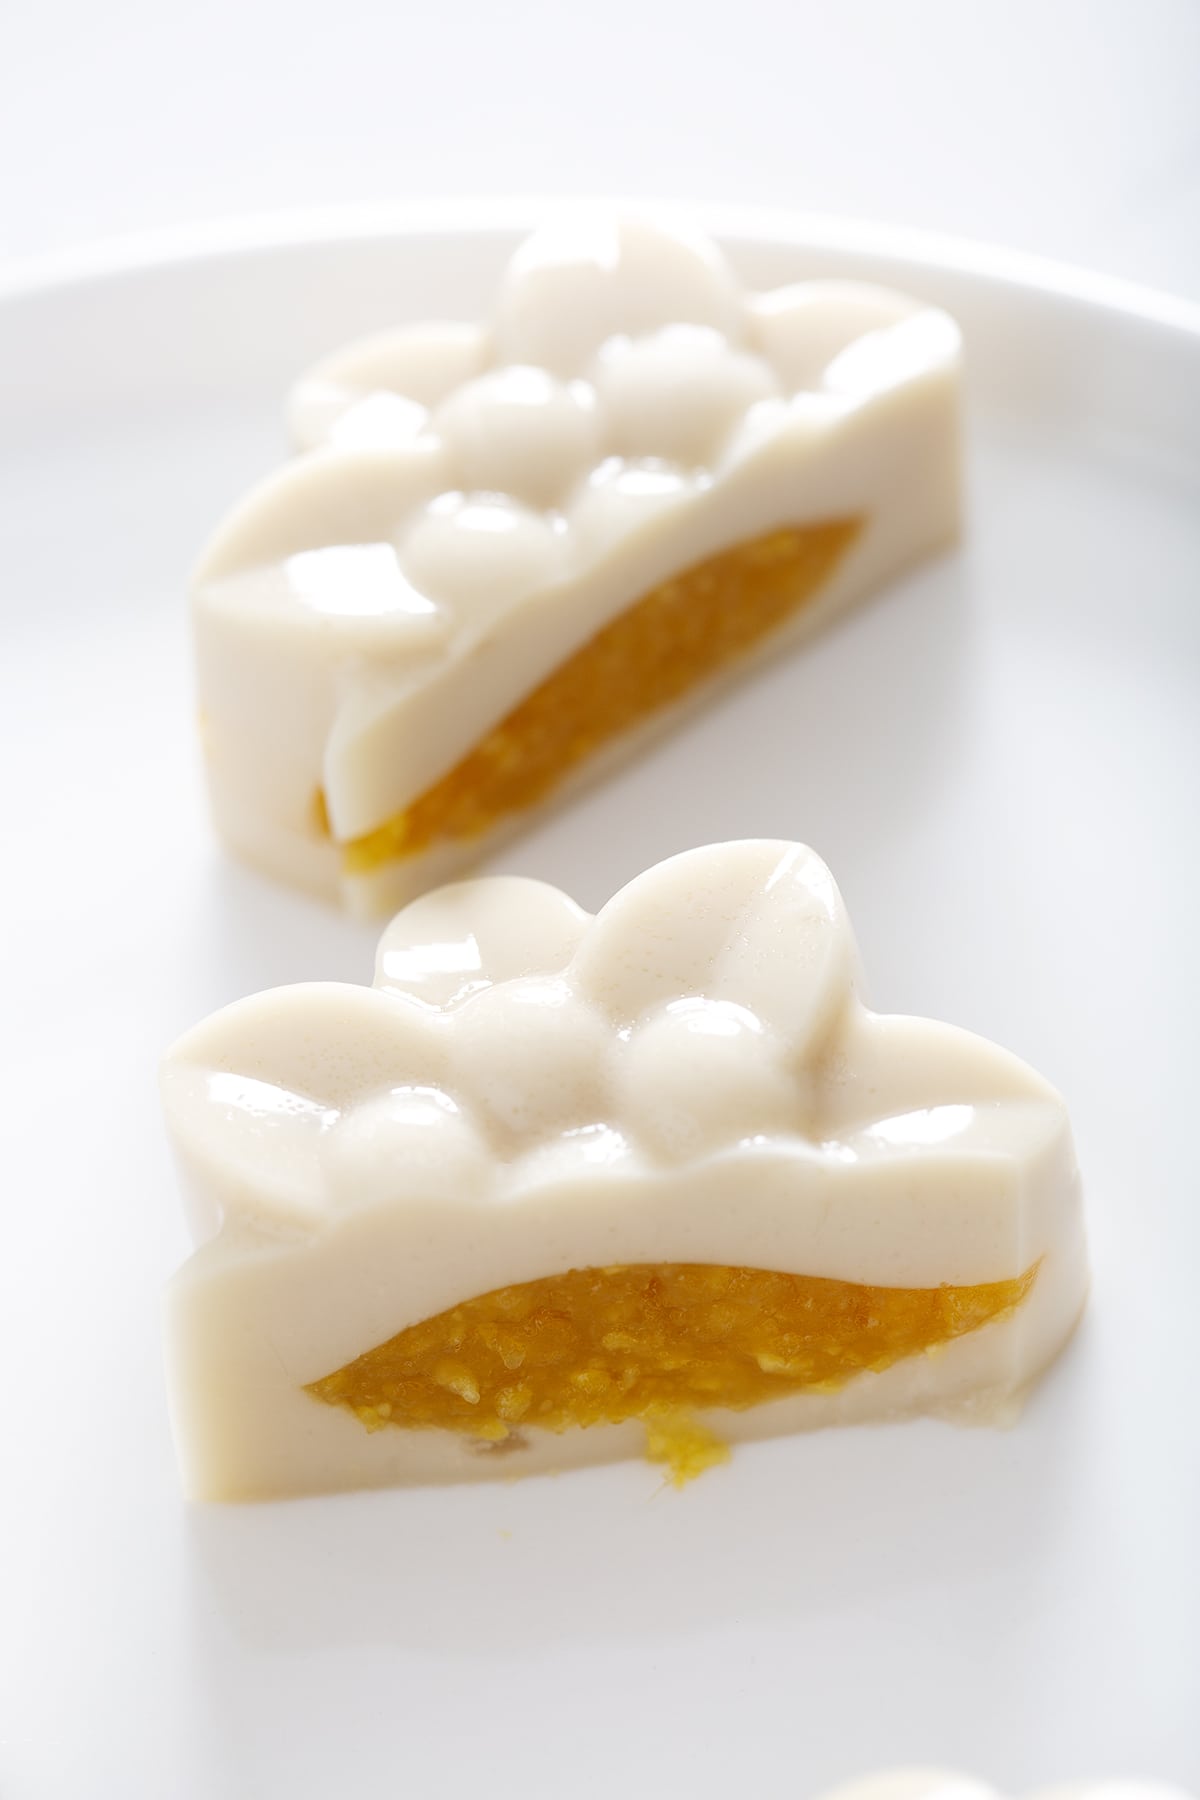 fruit jelly mooncake cut in half showing mango filled center